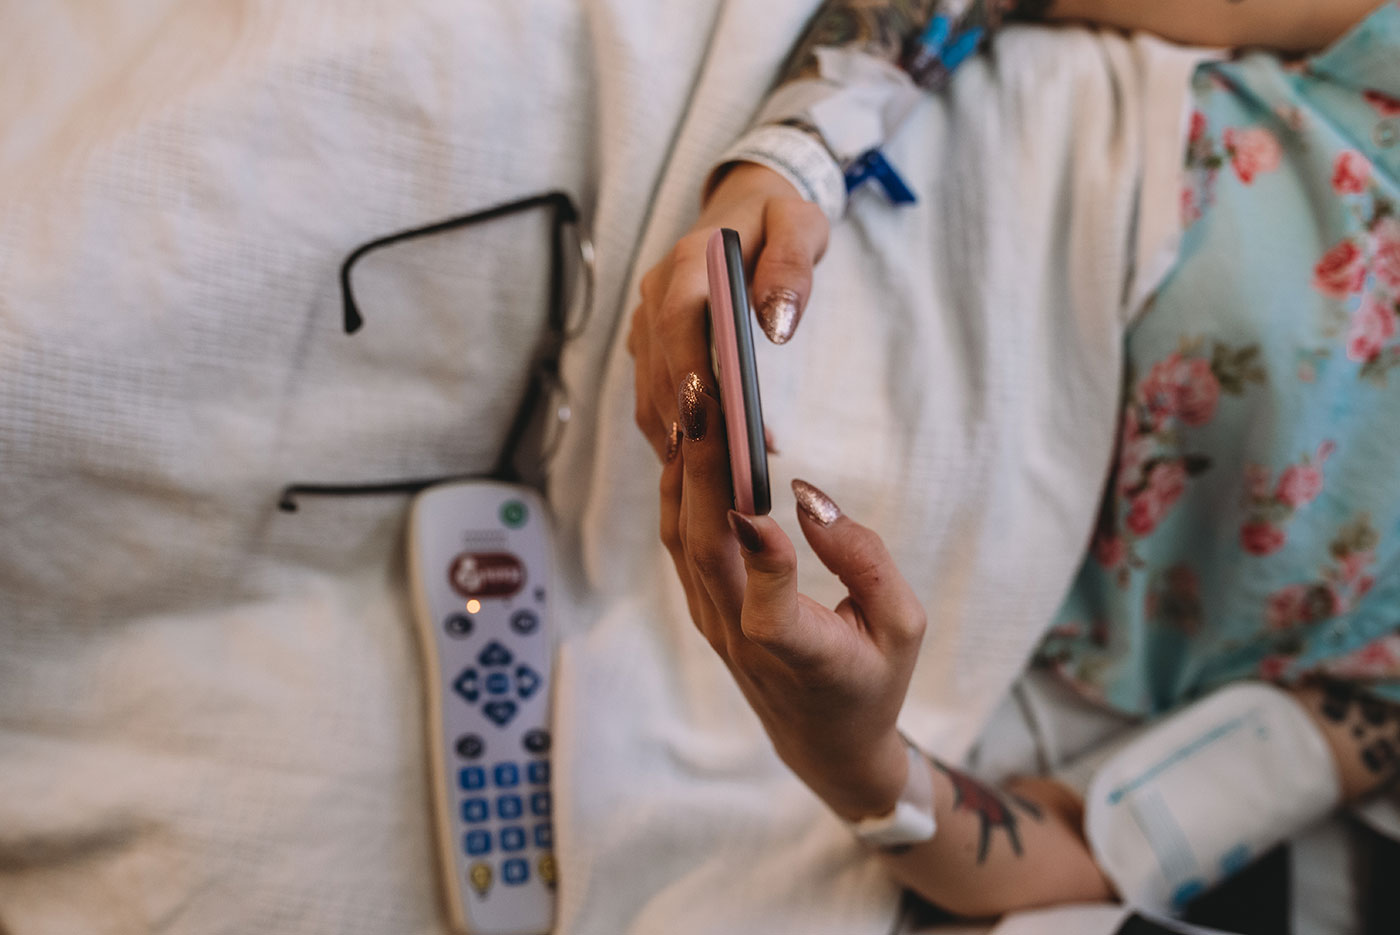 mom's hands texting on her phone in the hospital bed during labor